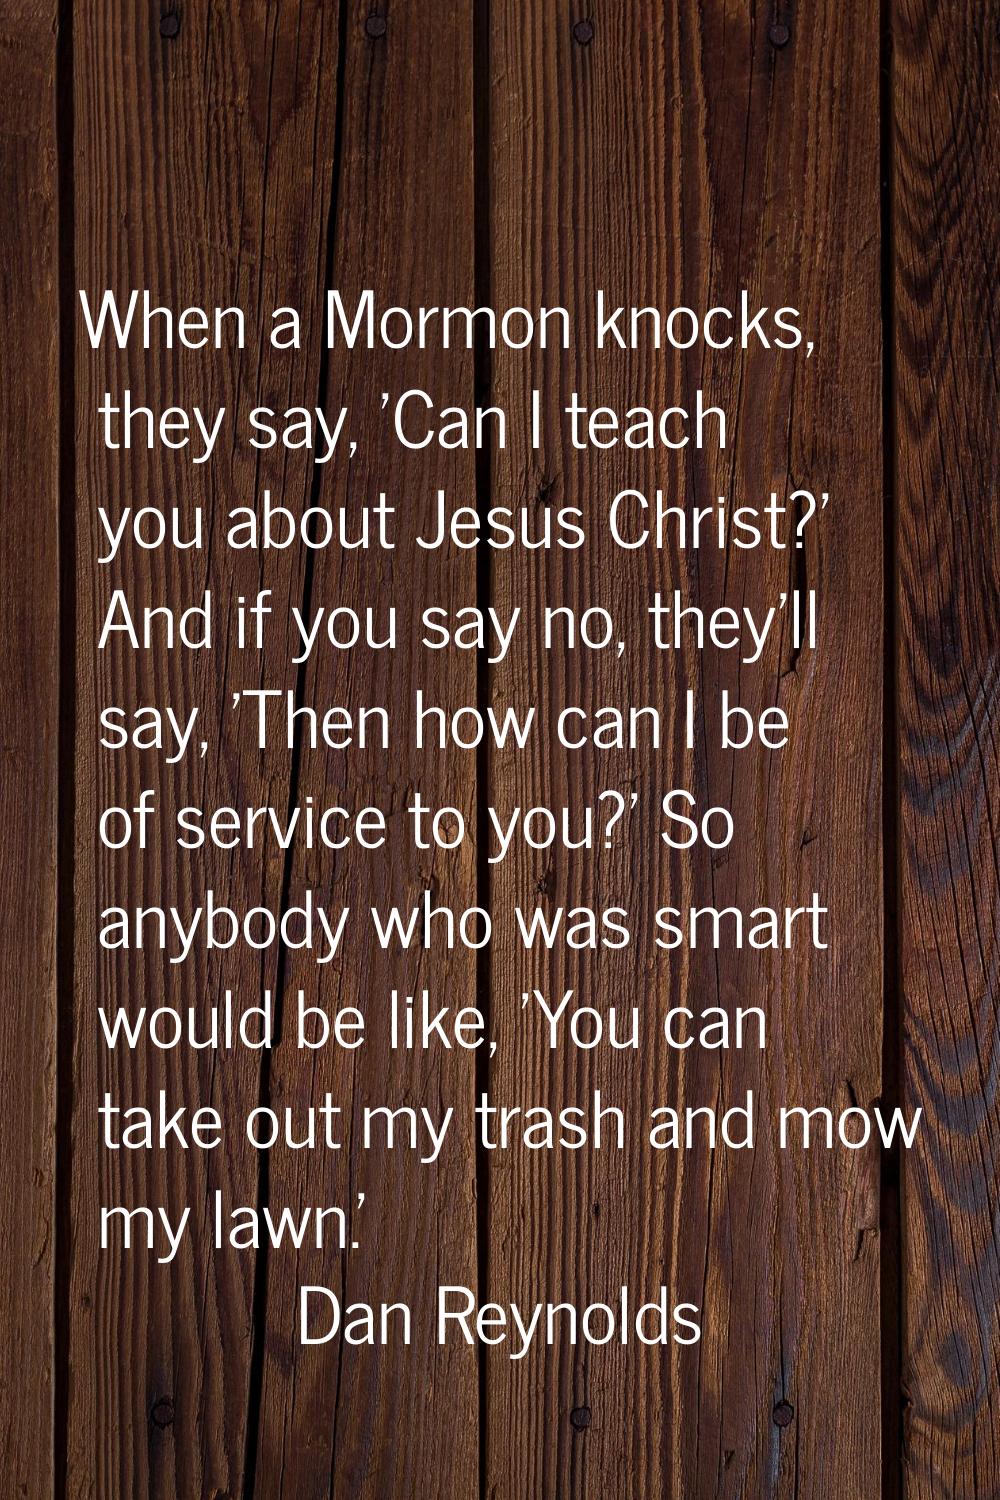 When a Mormon knocks, they say, 'Can I teach you about Jesus Christ?' And if you say no, they'll sa